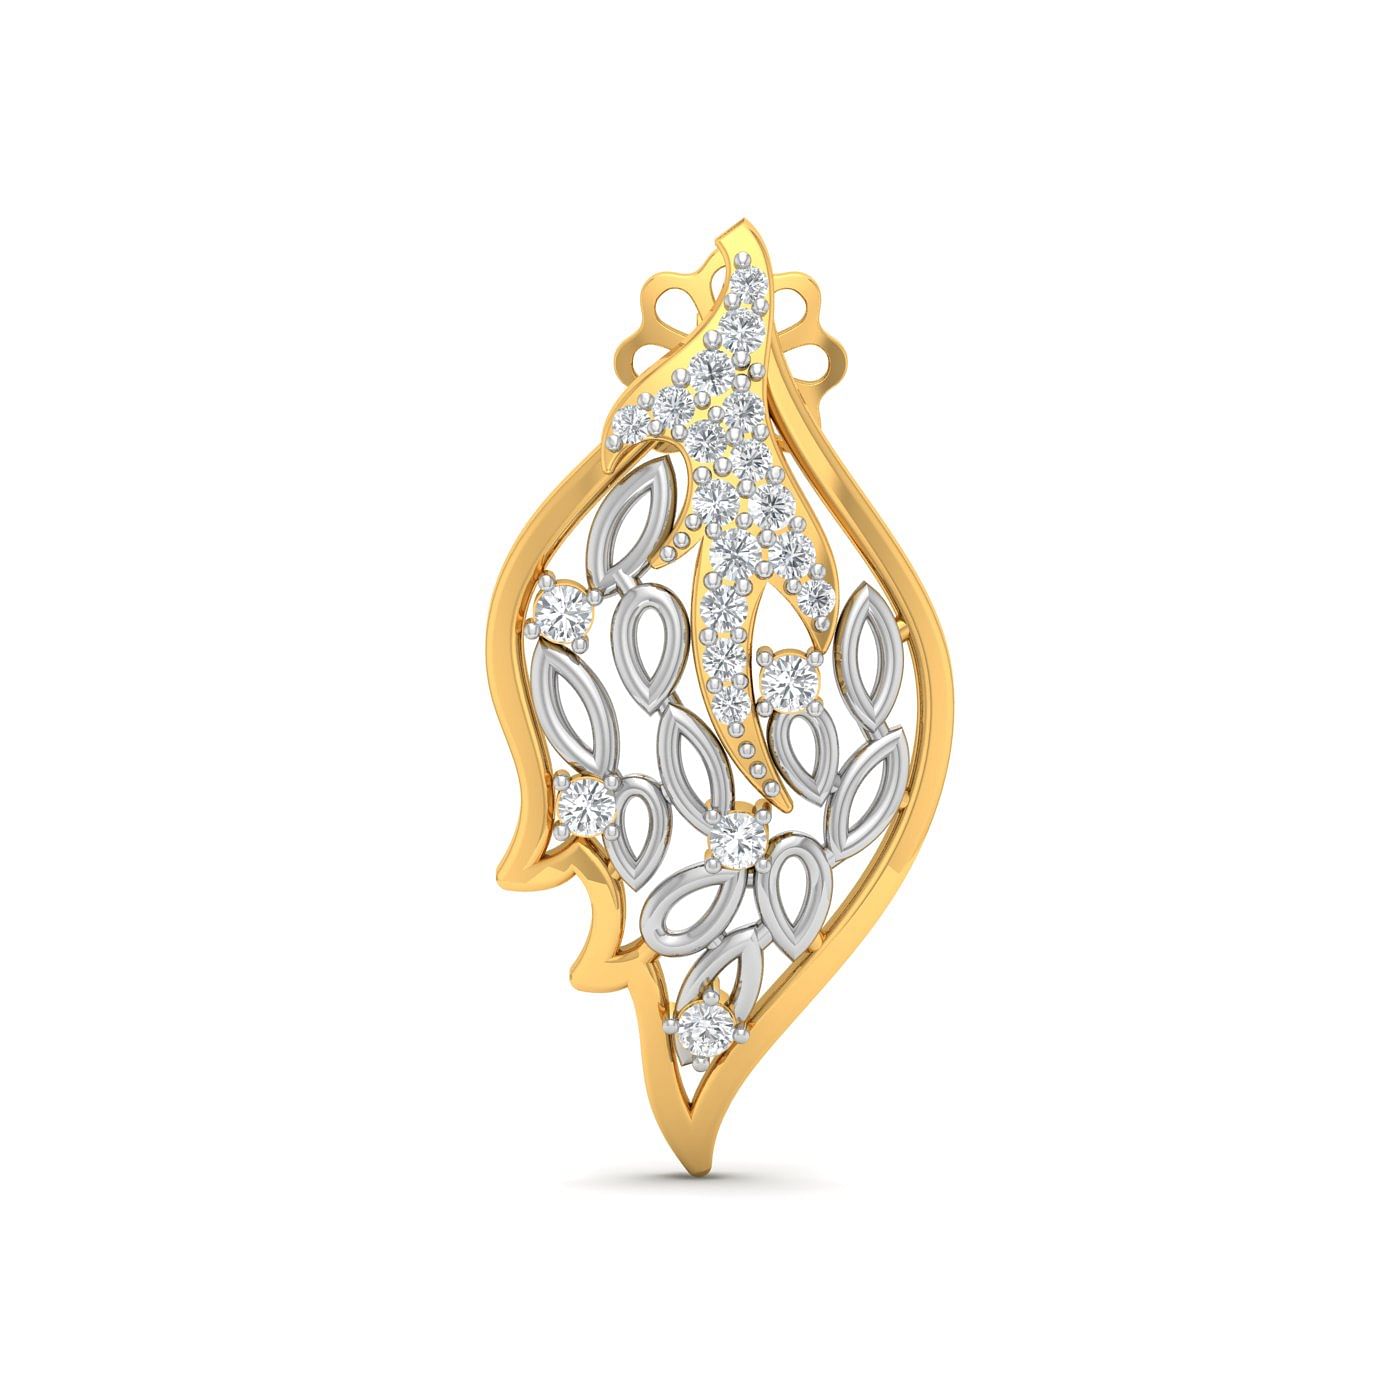 Leafy Design Yellow Gold Diamond Earring For Daily Wear